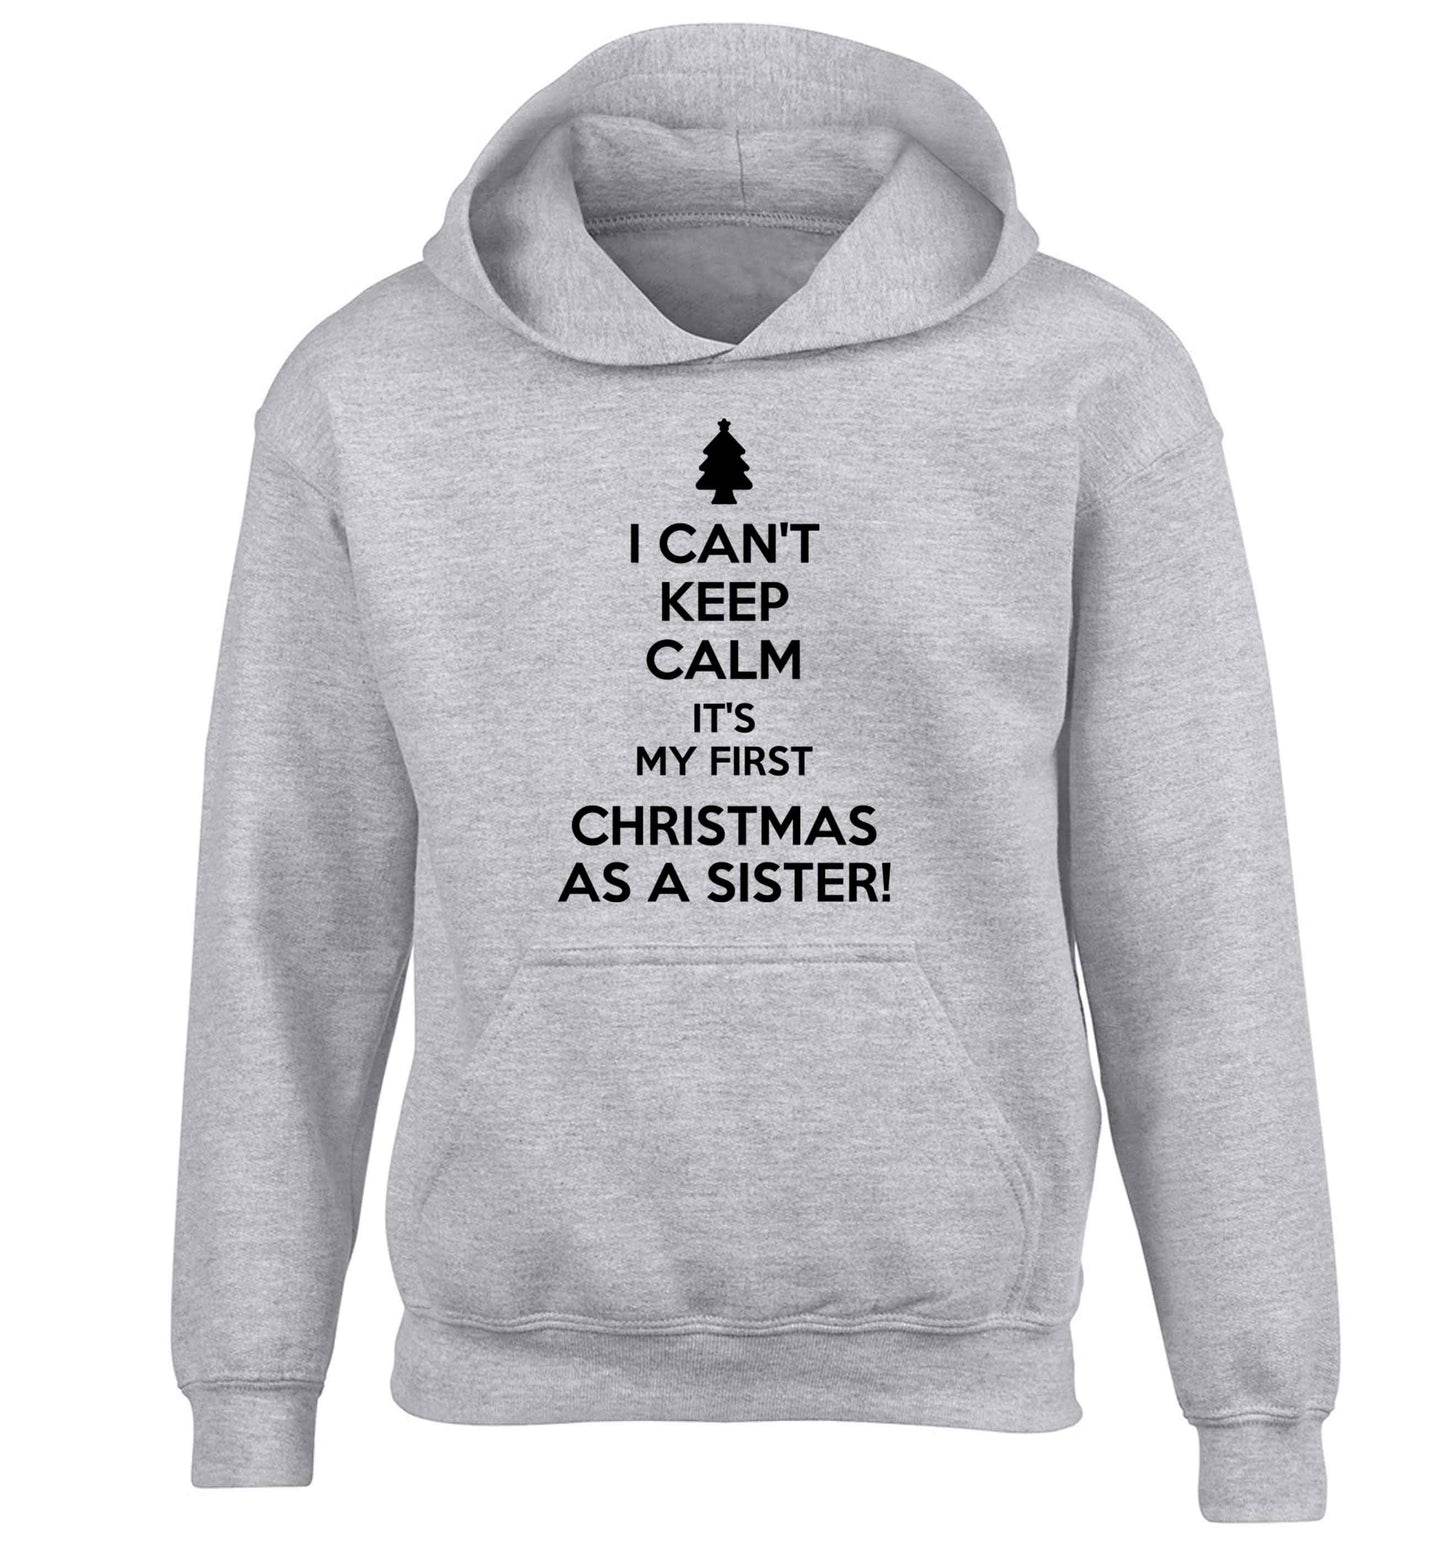 I can't keep calm it's my first Christmas as a sister! children's grey hoodie 12-13 Years